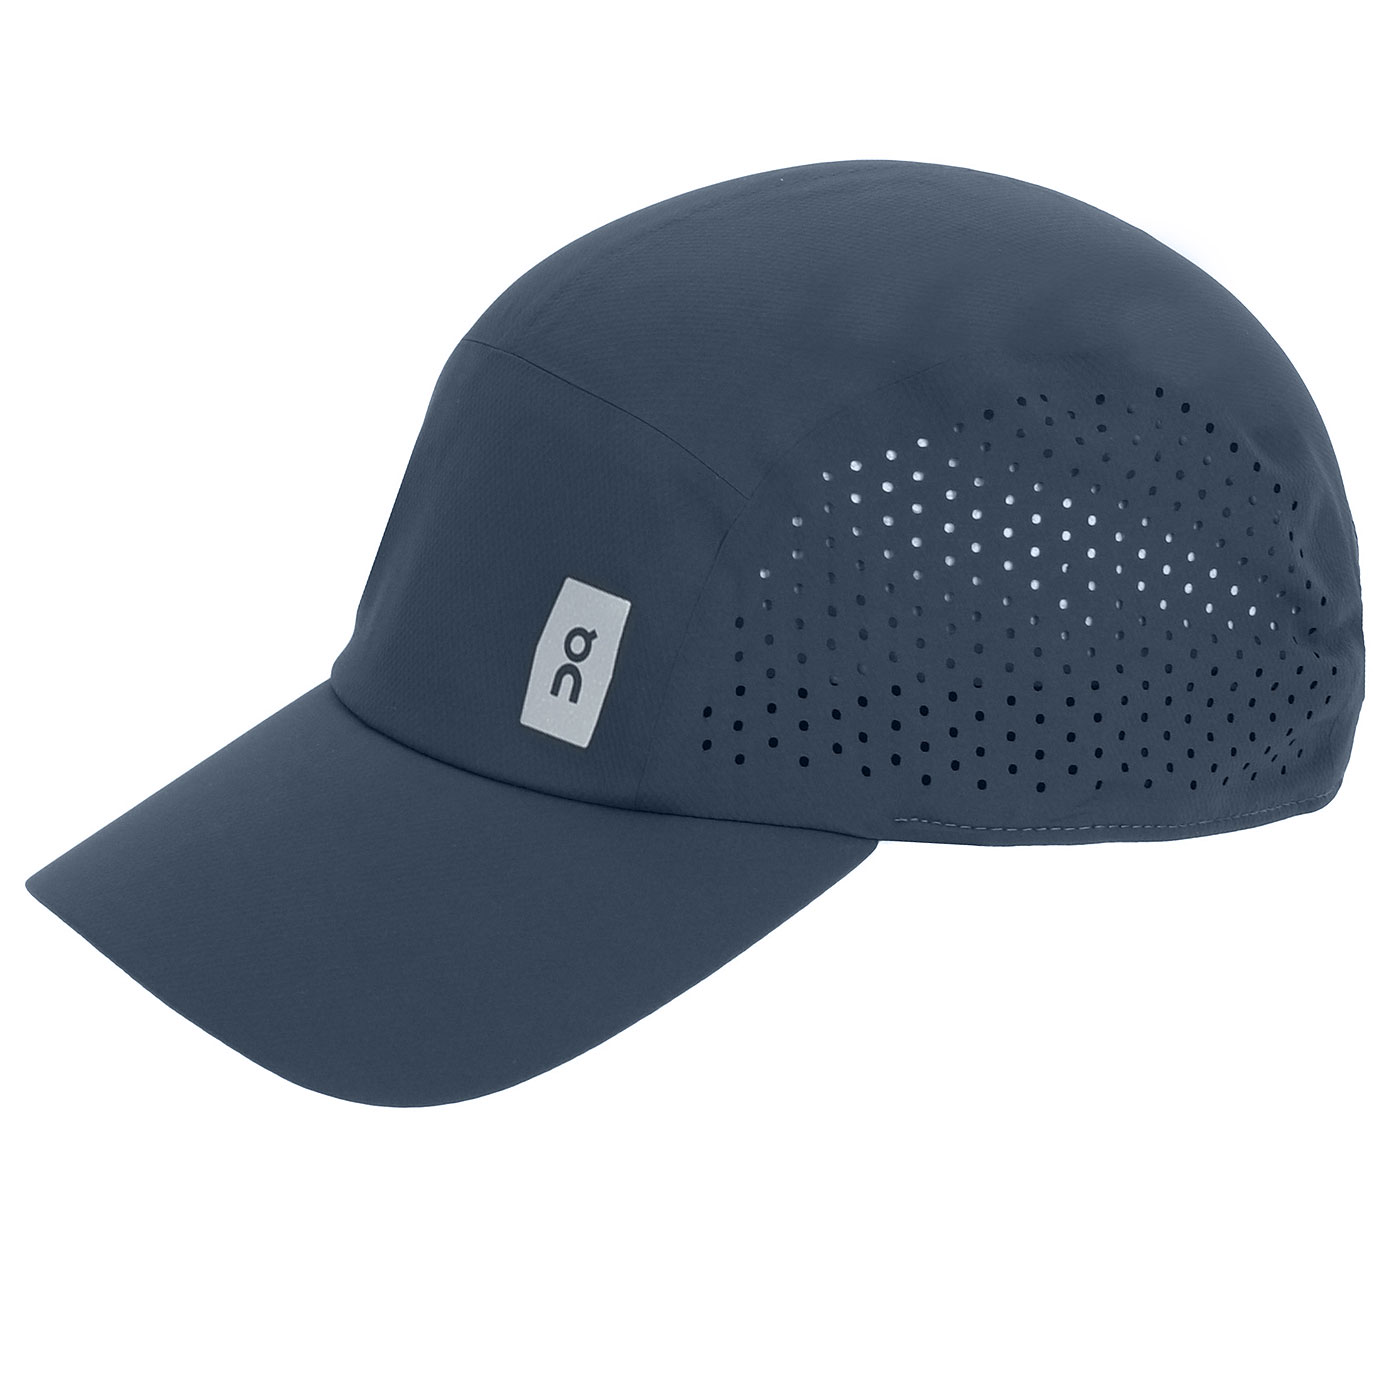 Picture of On Lightweight Cap - Navy